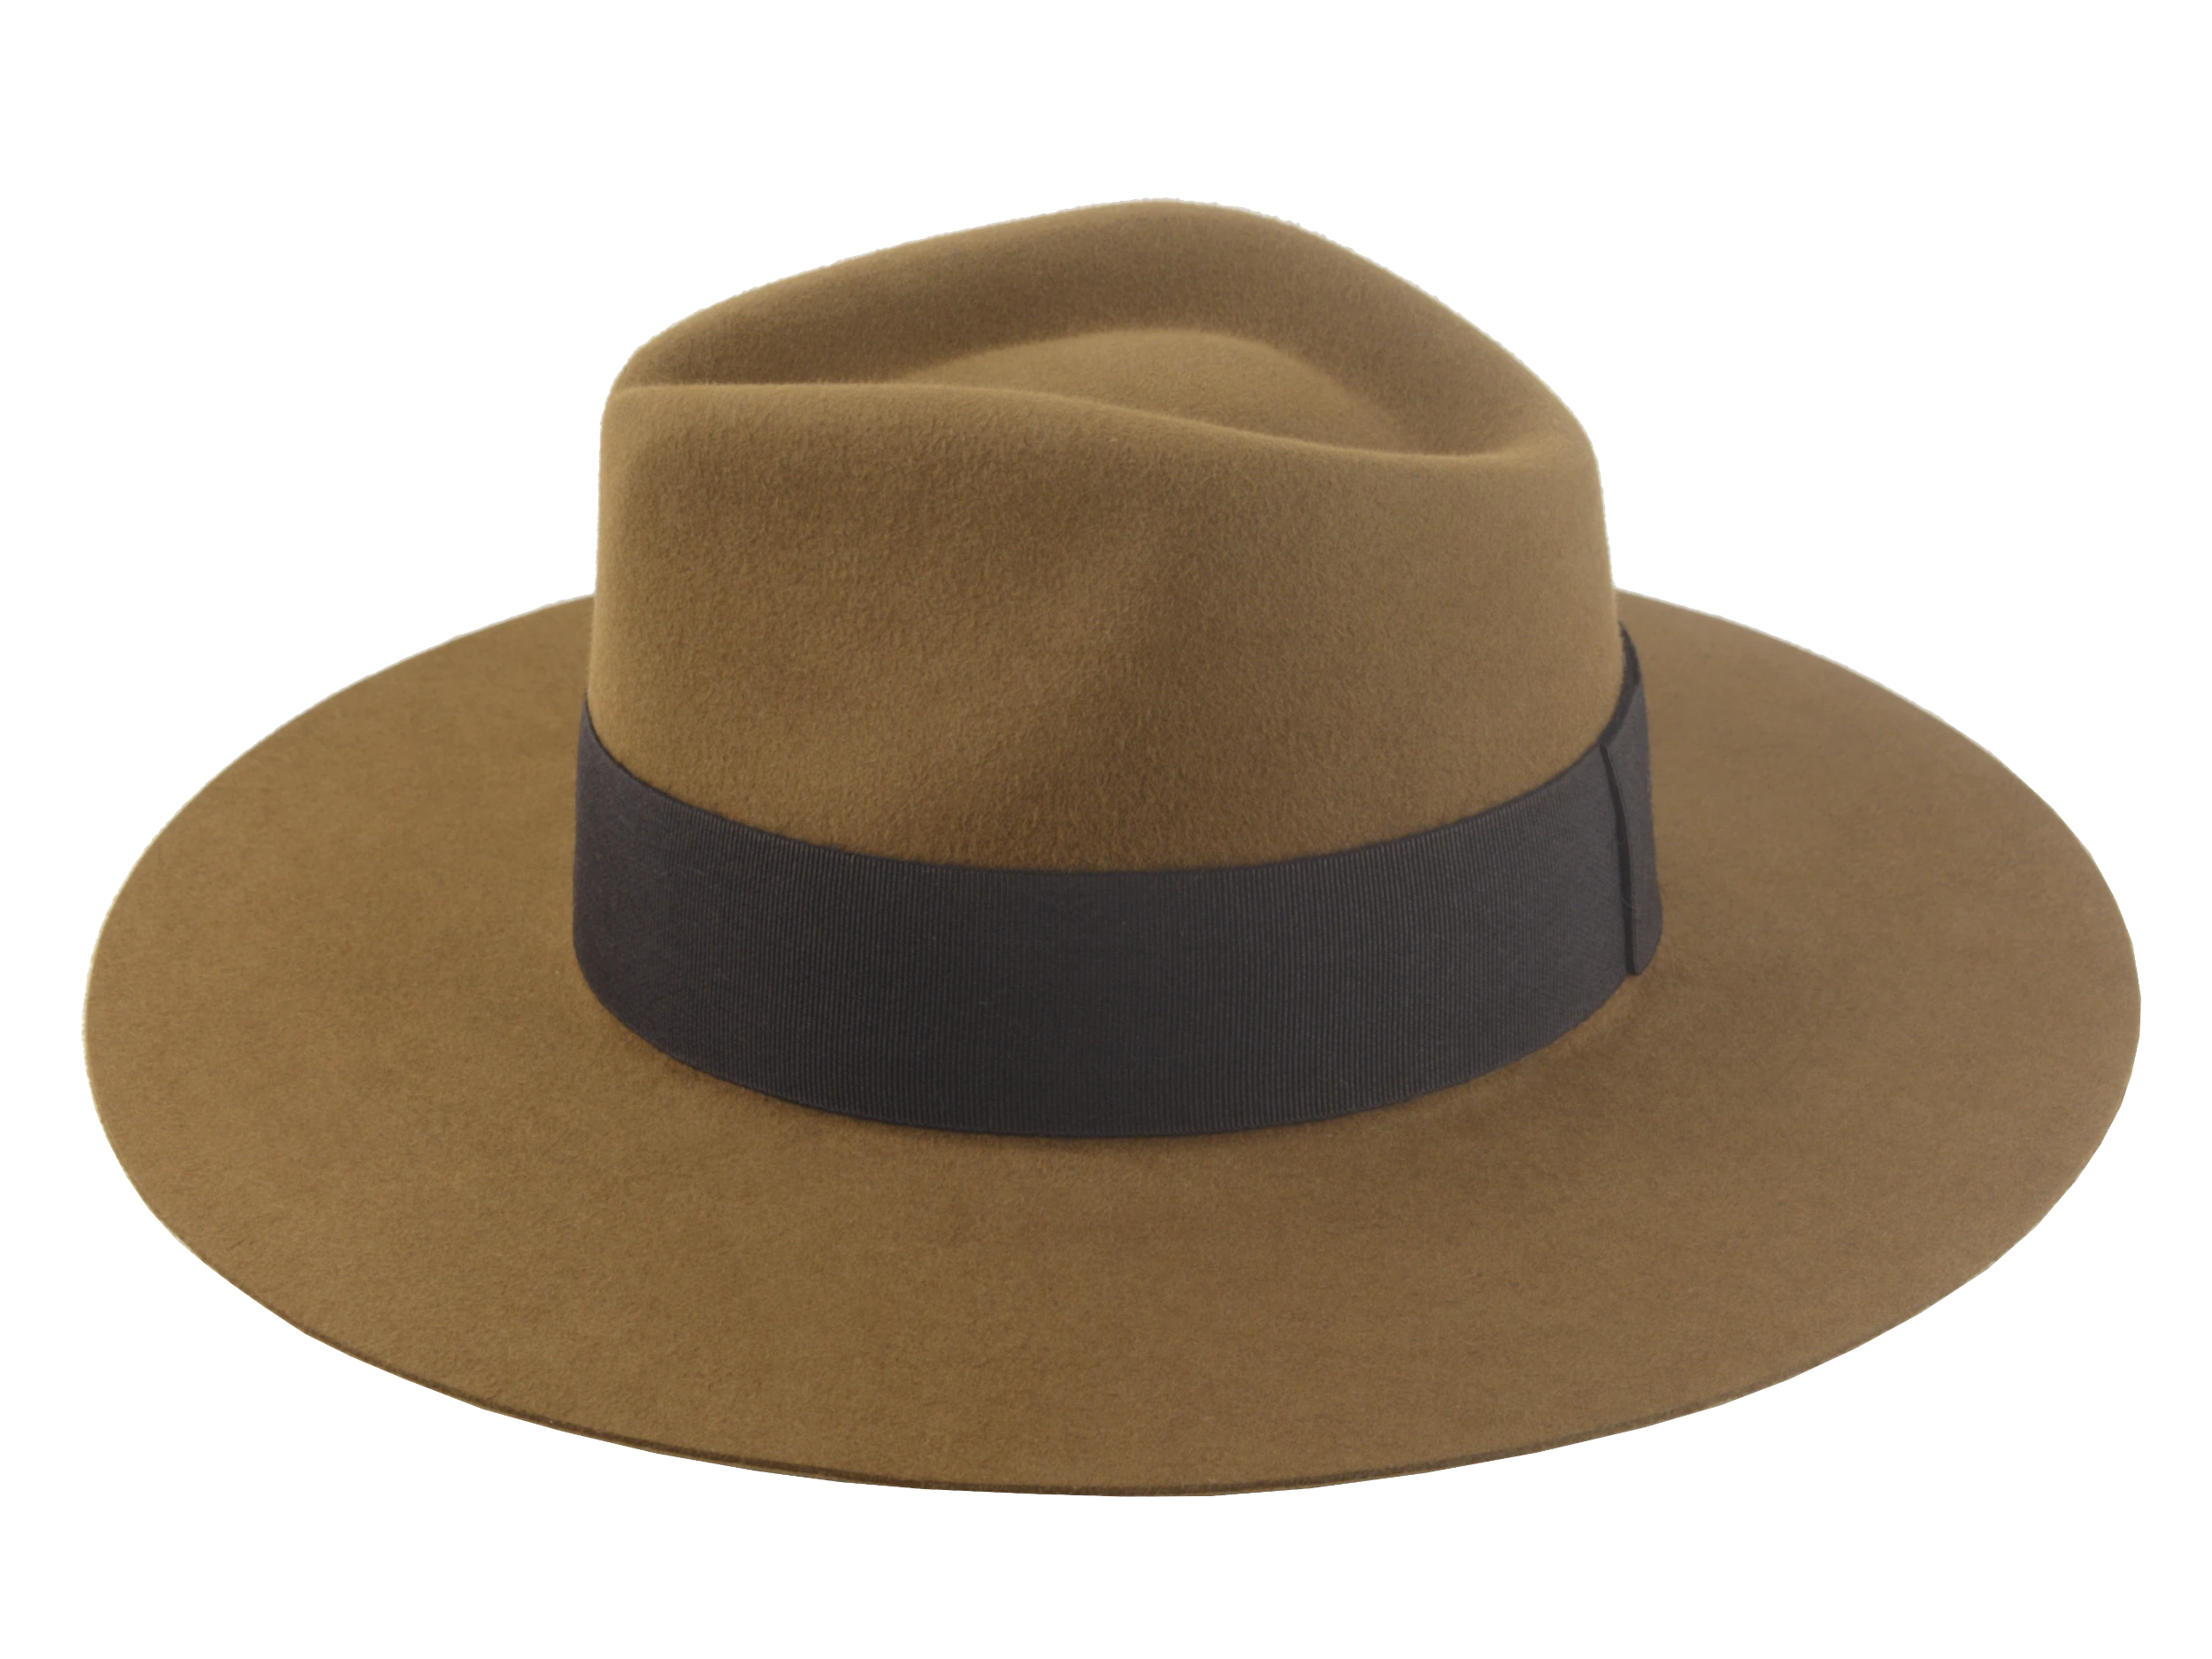 The Prairie: Side view showing the wide brim and elegant silhouette | Agnoulita Hats